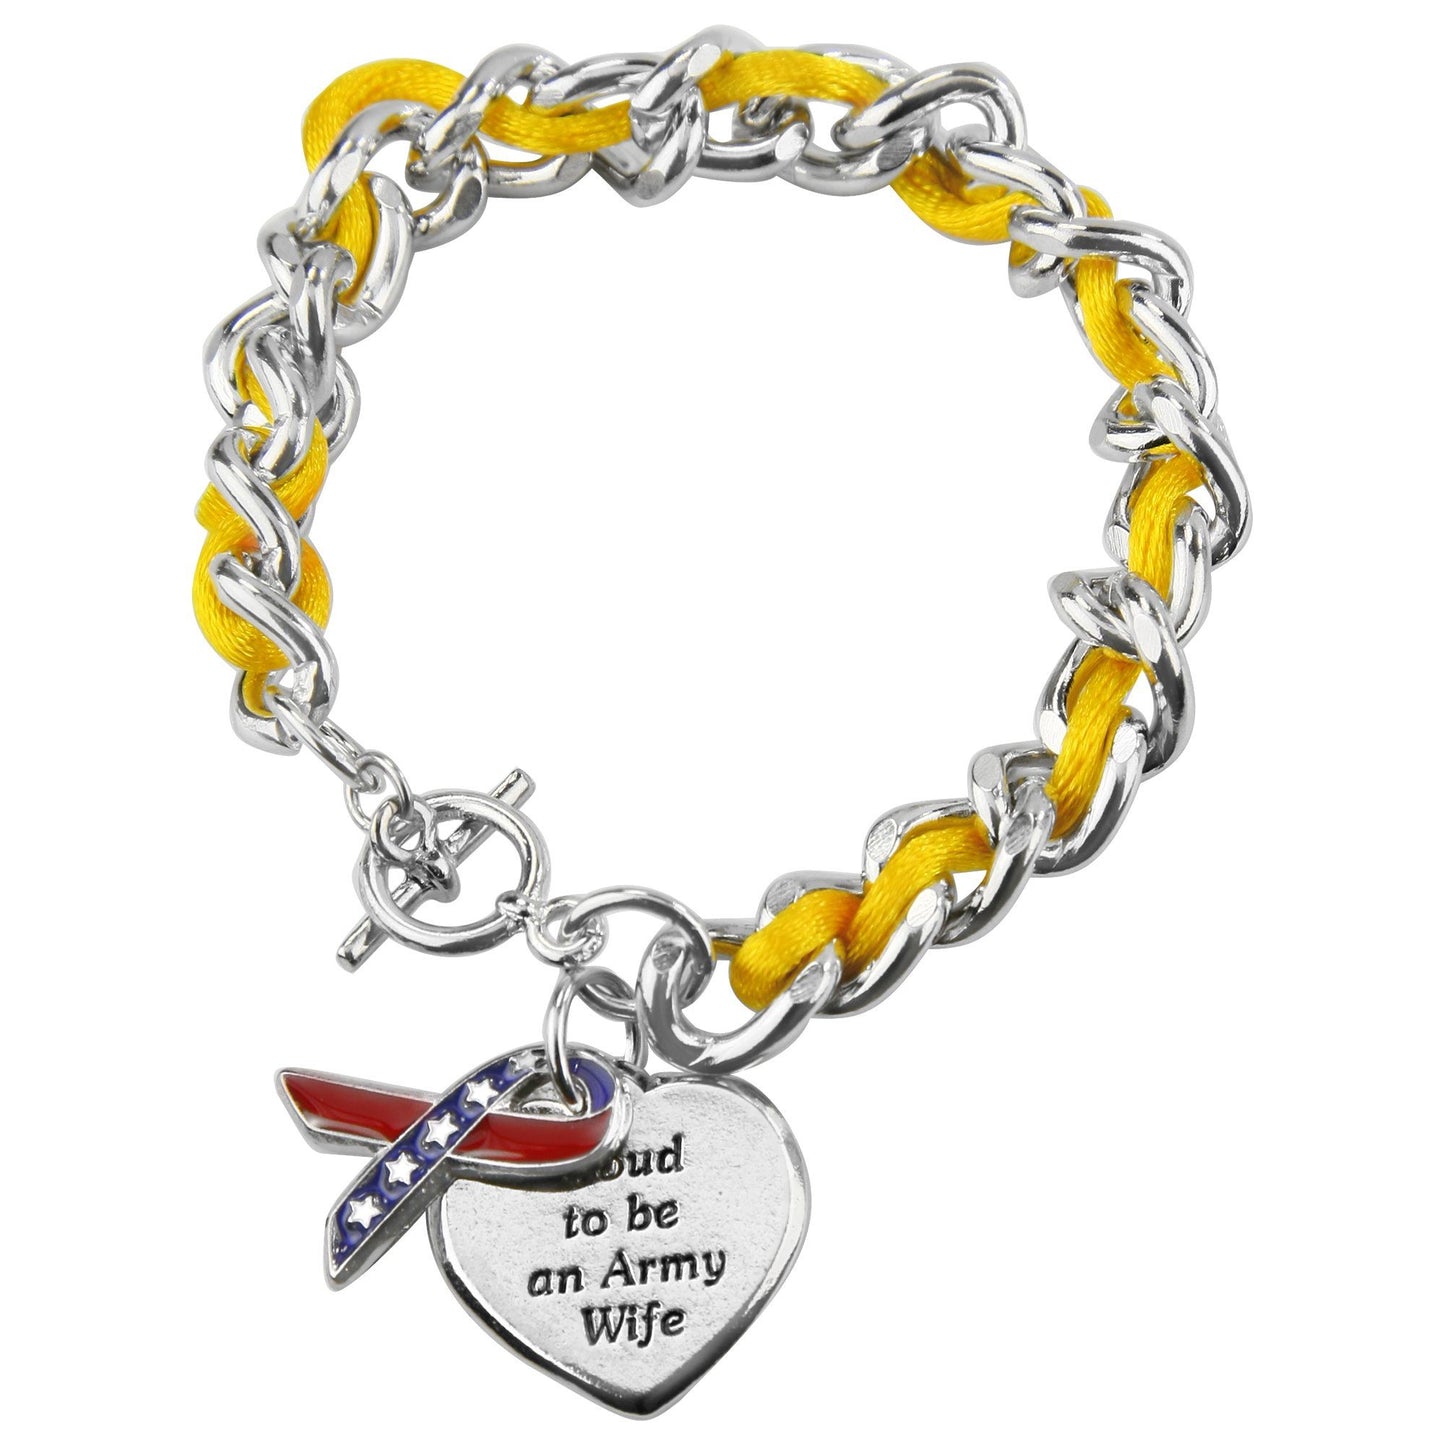 Proud To Be An Army Wife Ribbon Charm Bracelet